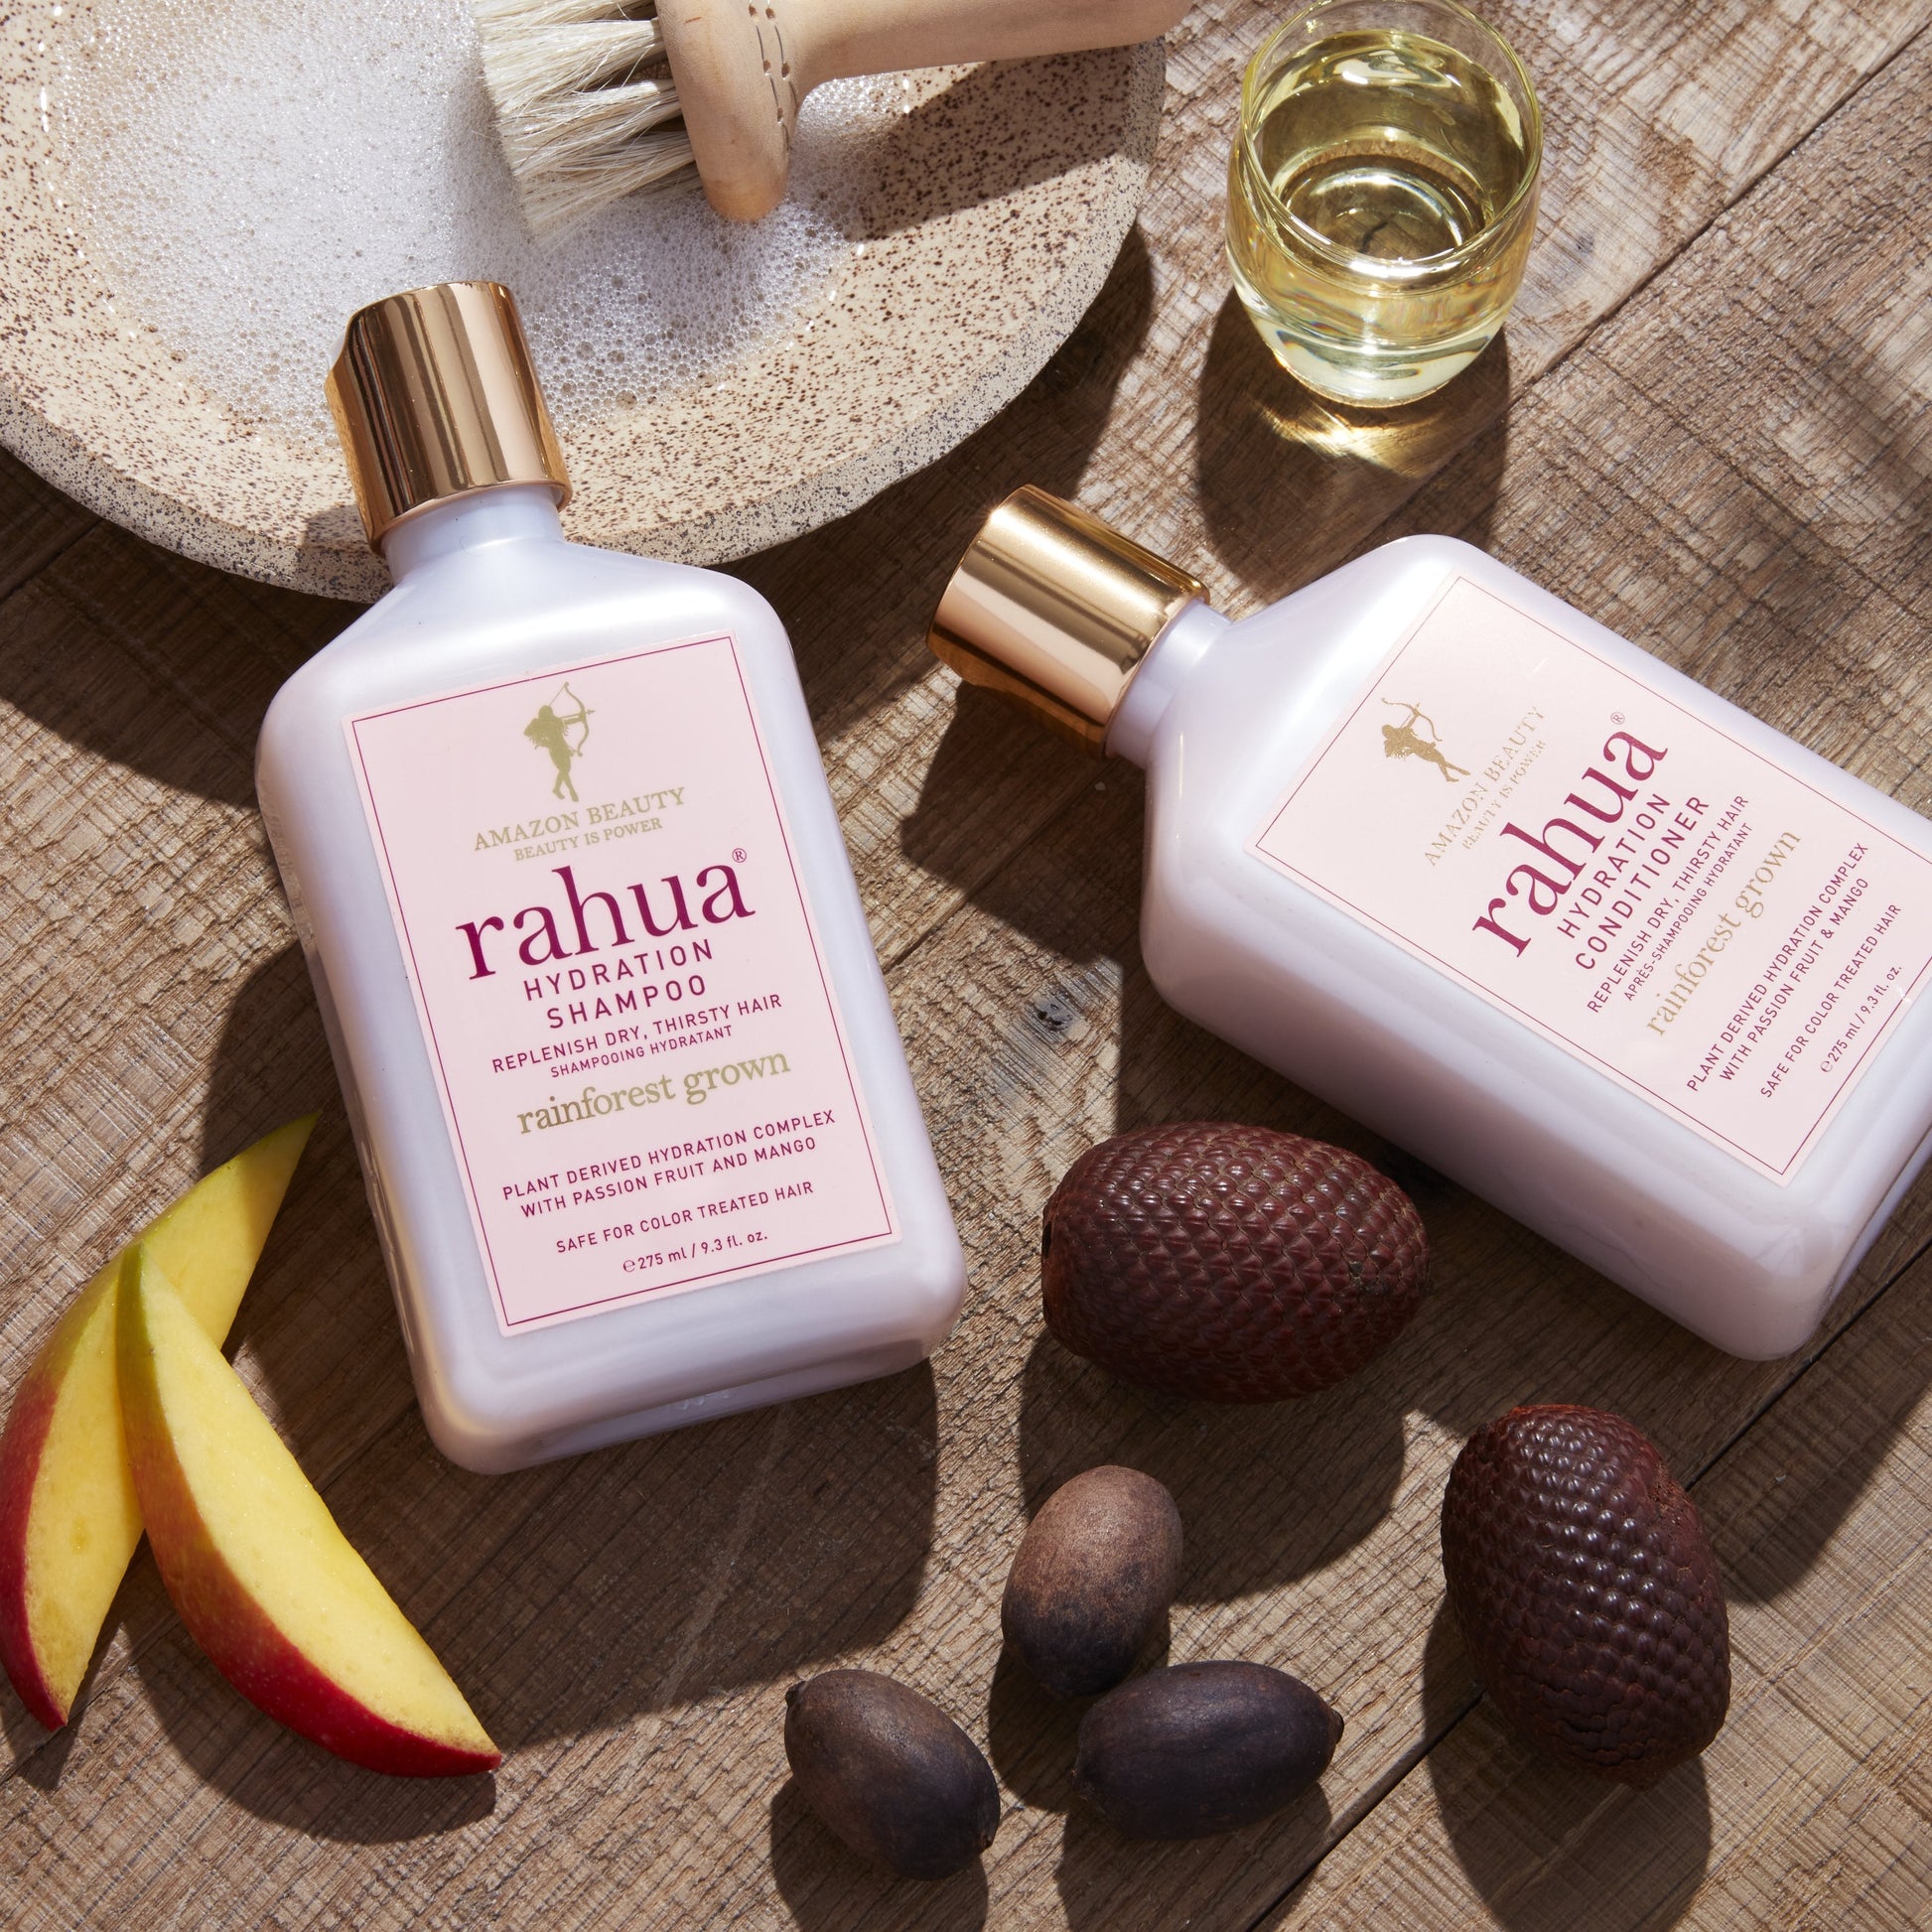 rahua hydration shampoo and conditioner bottle with natural ingredients including Morete seeds, mango slice, rahua seeds